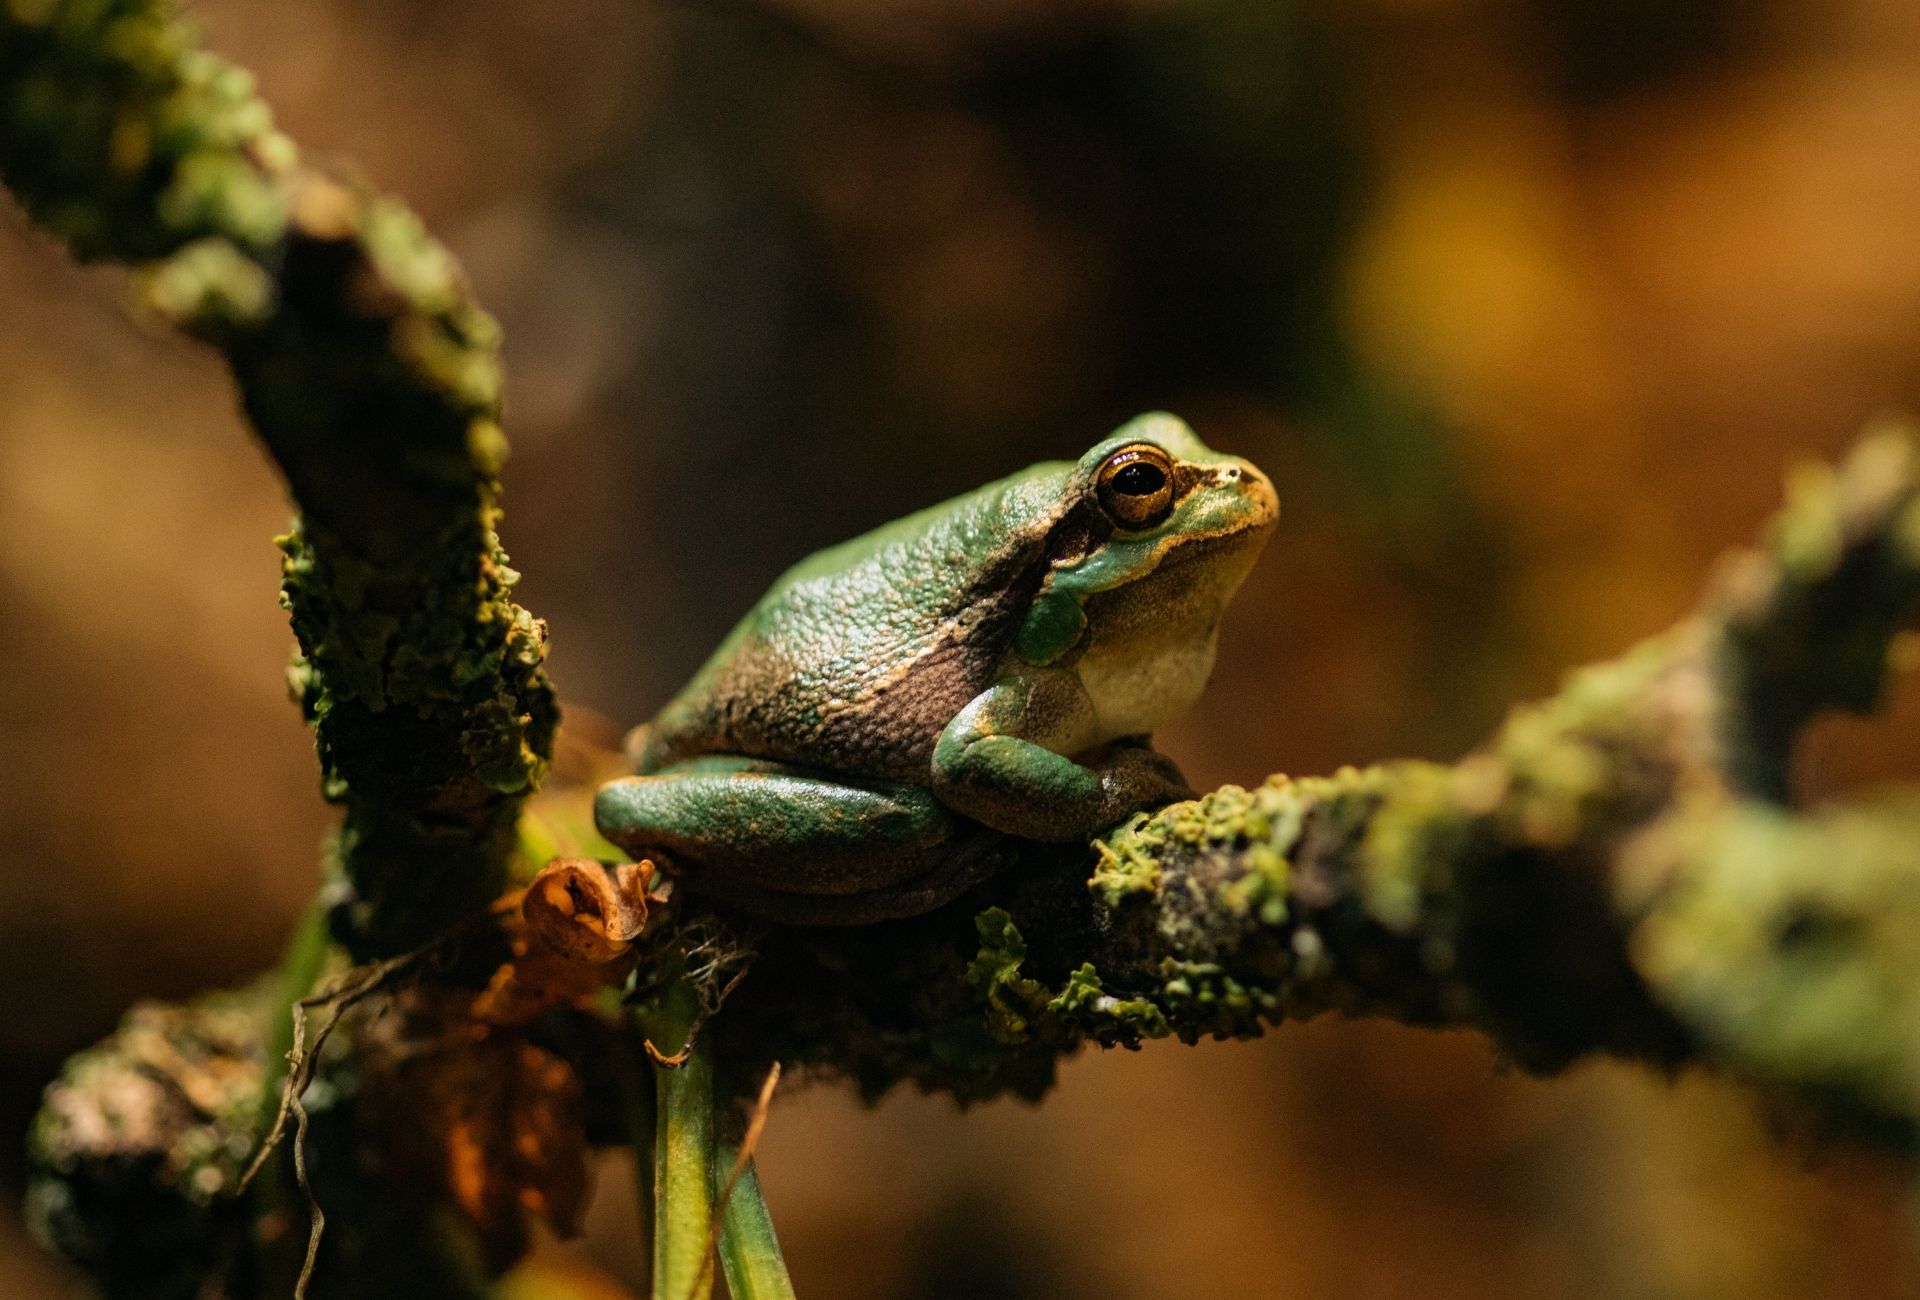 Frog sitting on mossy branch in forest